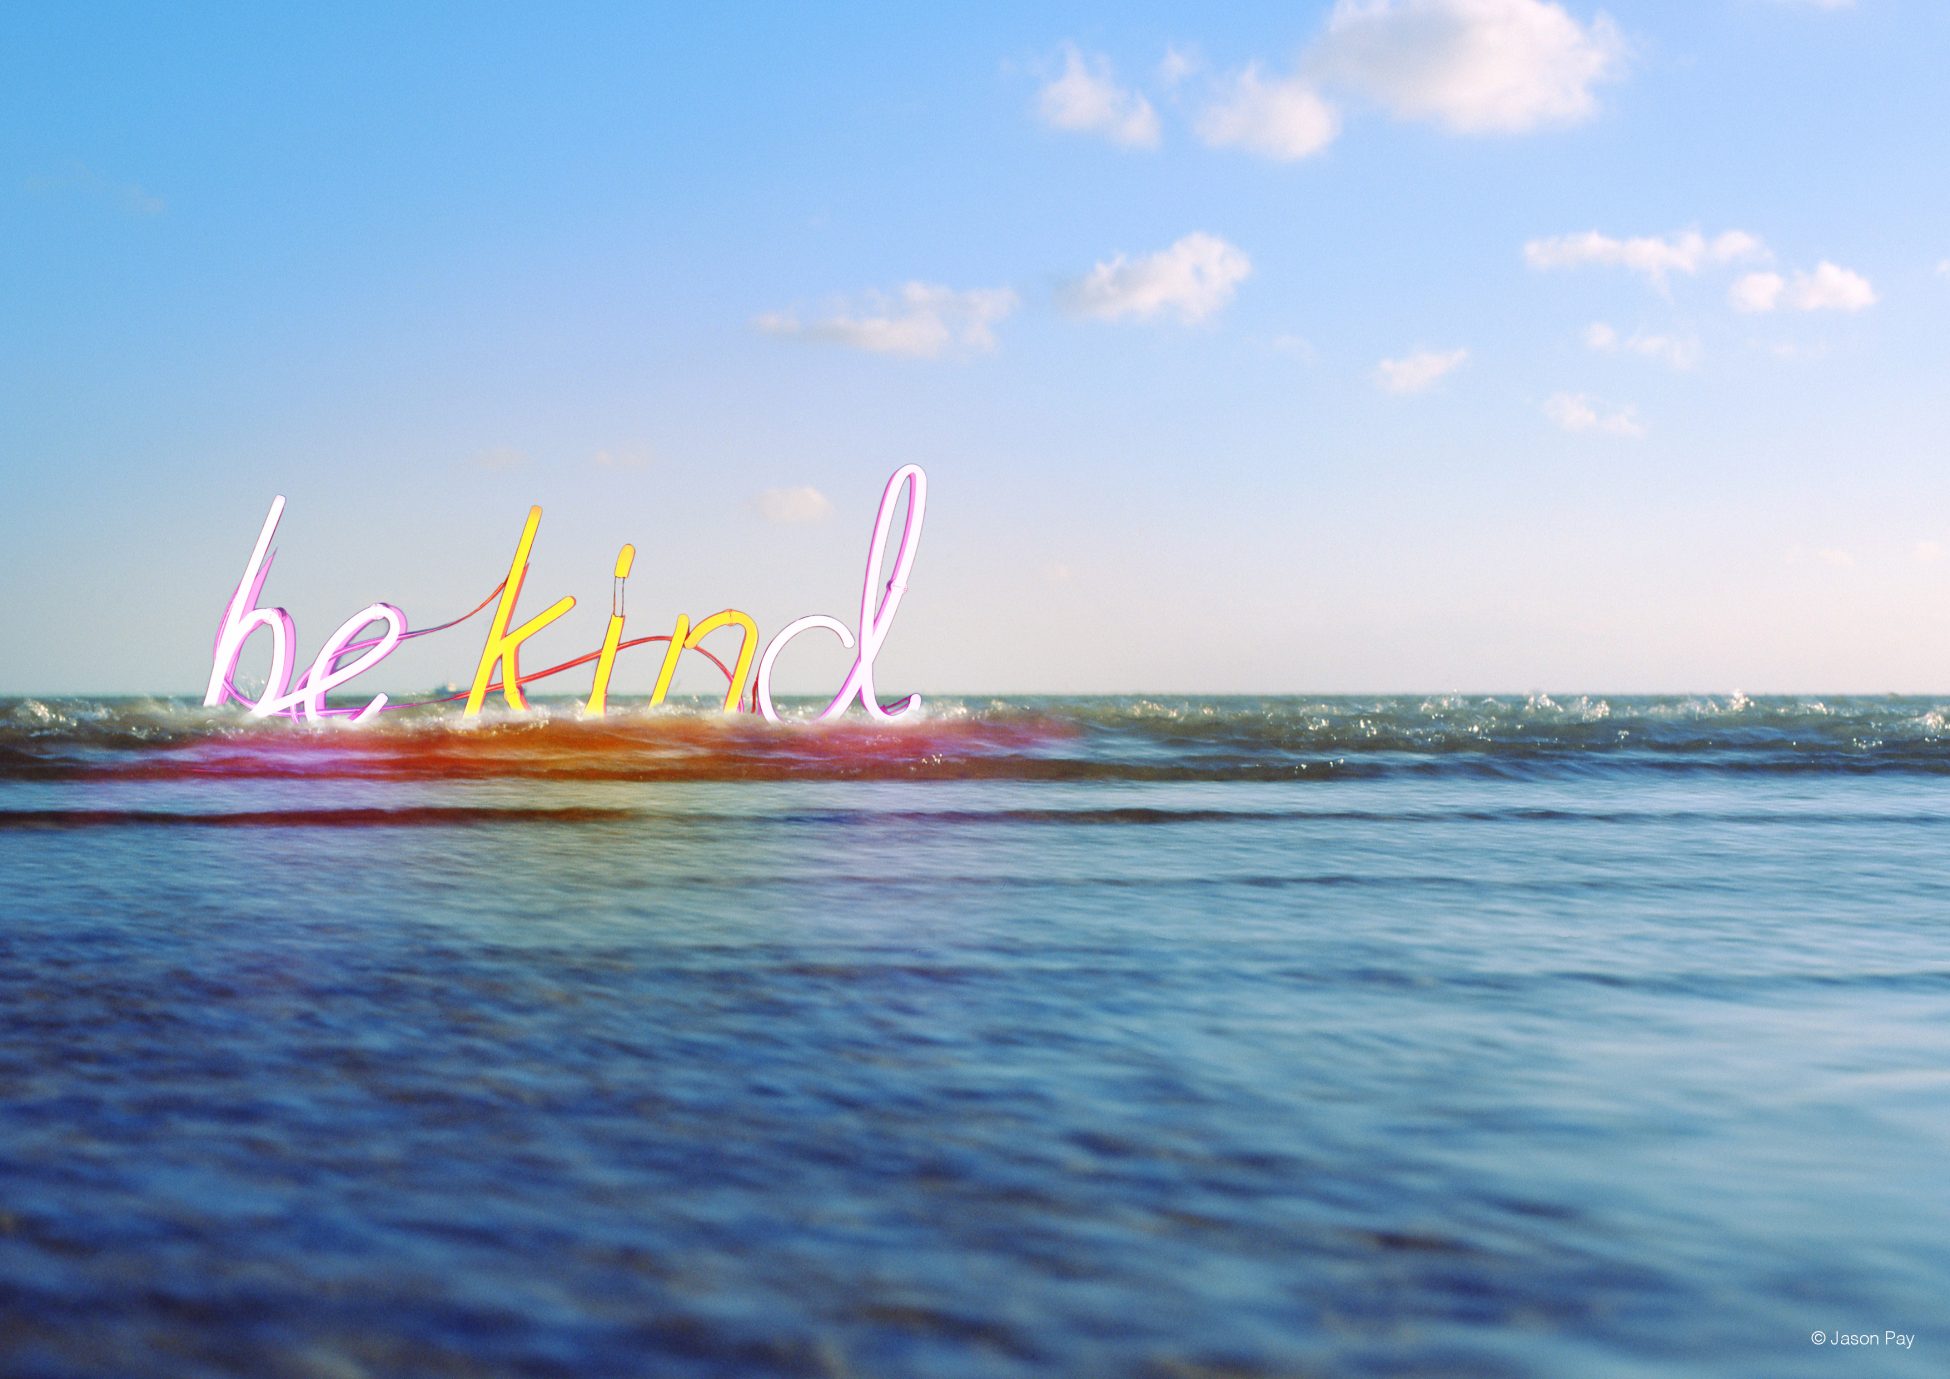 Digital artwork. A photo looking out from the shore at mostly calm seas with a small wave breaking nearby and a blue sky with a couple of small white clouds. Where the wave is breaking is a large neon sign spelling out the words 'be kind' in yellow and pink lighting.